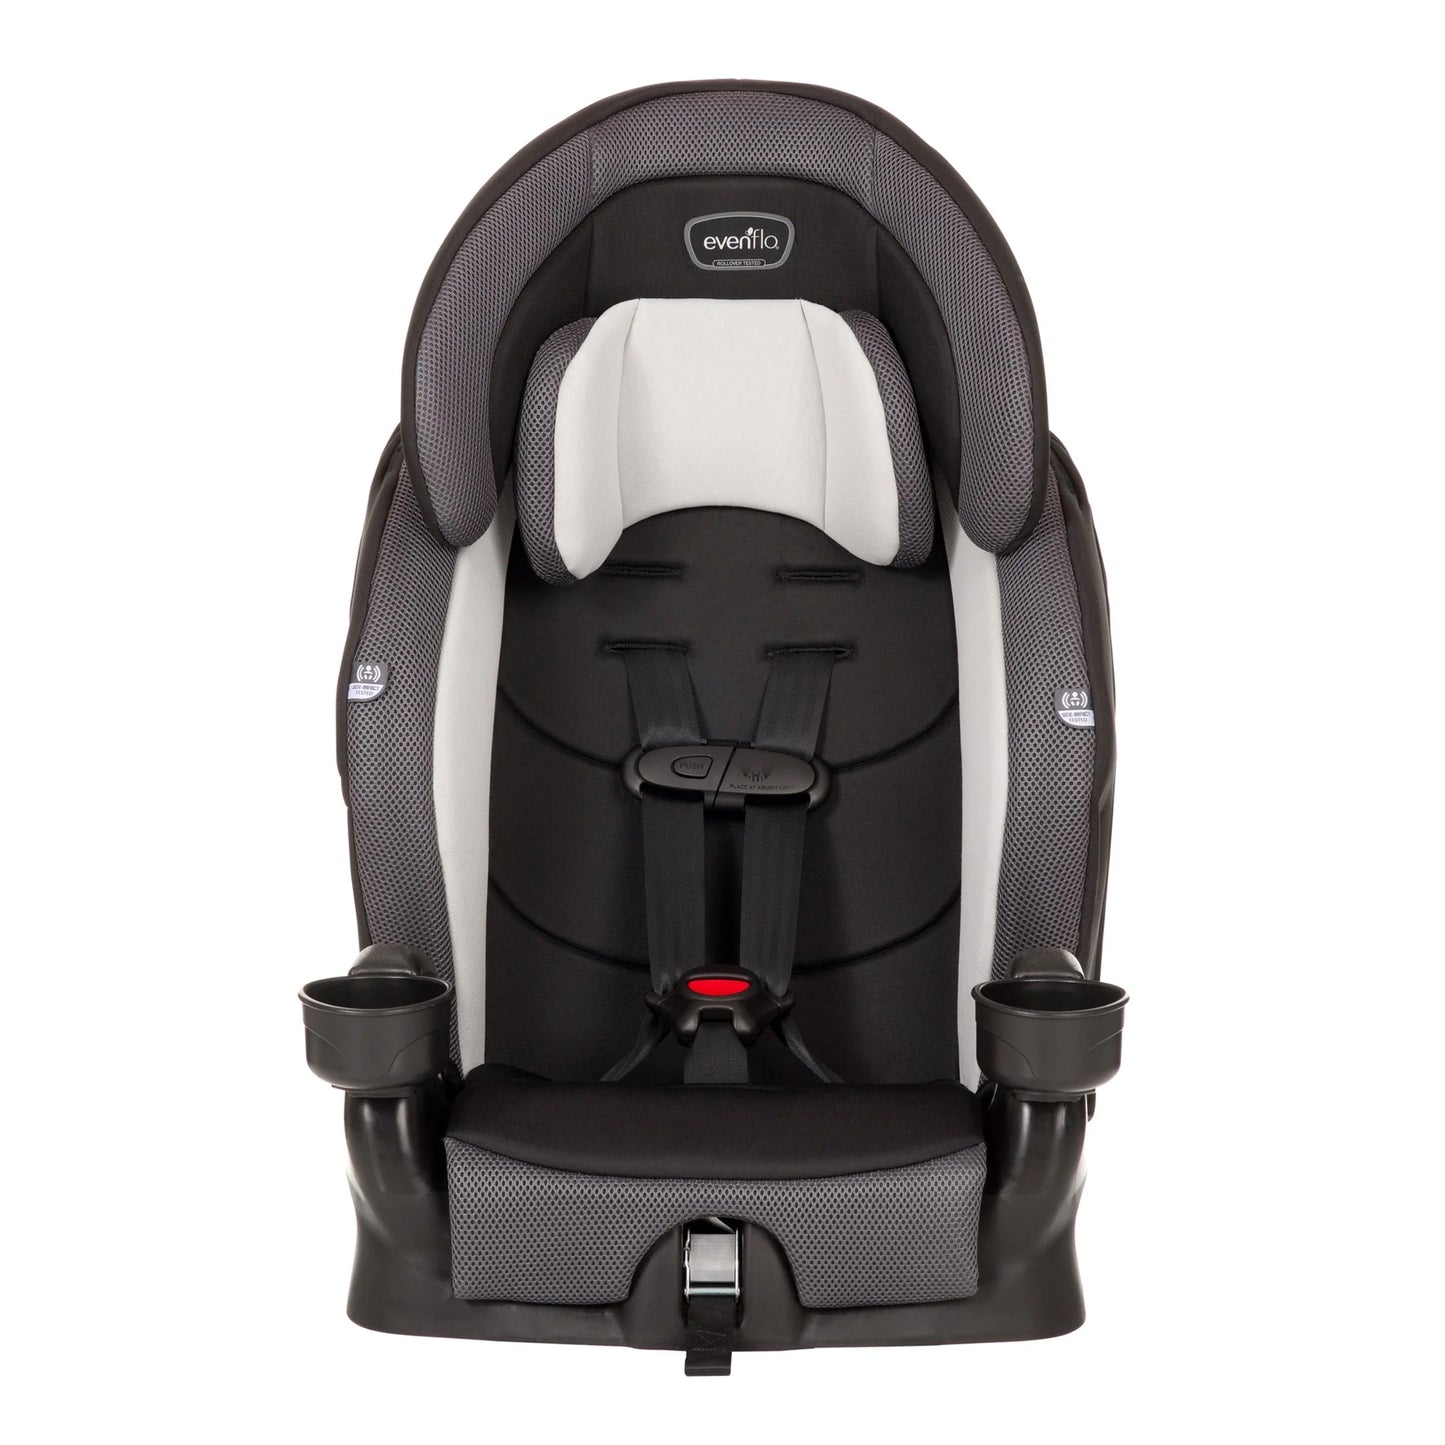 New Evenflo Chase Plus 2 in 1 Booster Seat Car Seat (Huron Black)